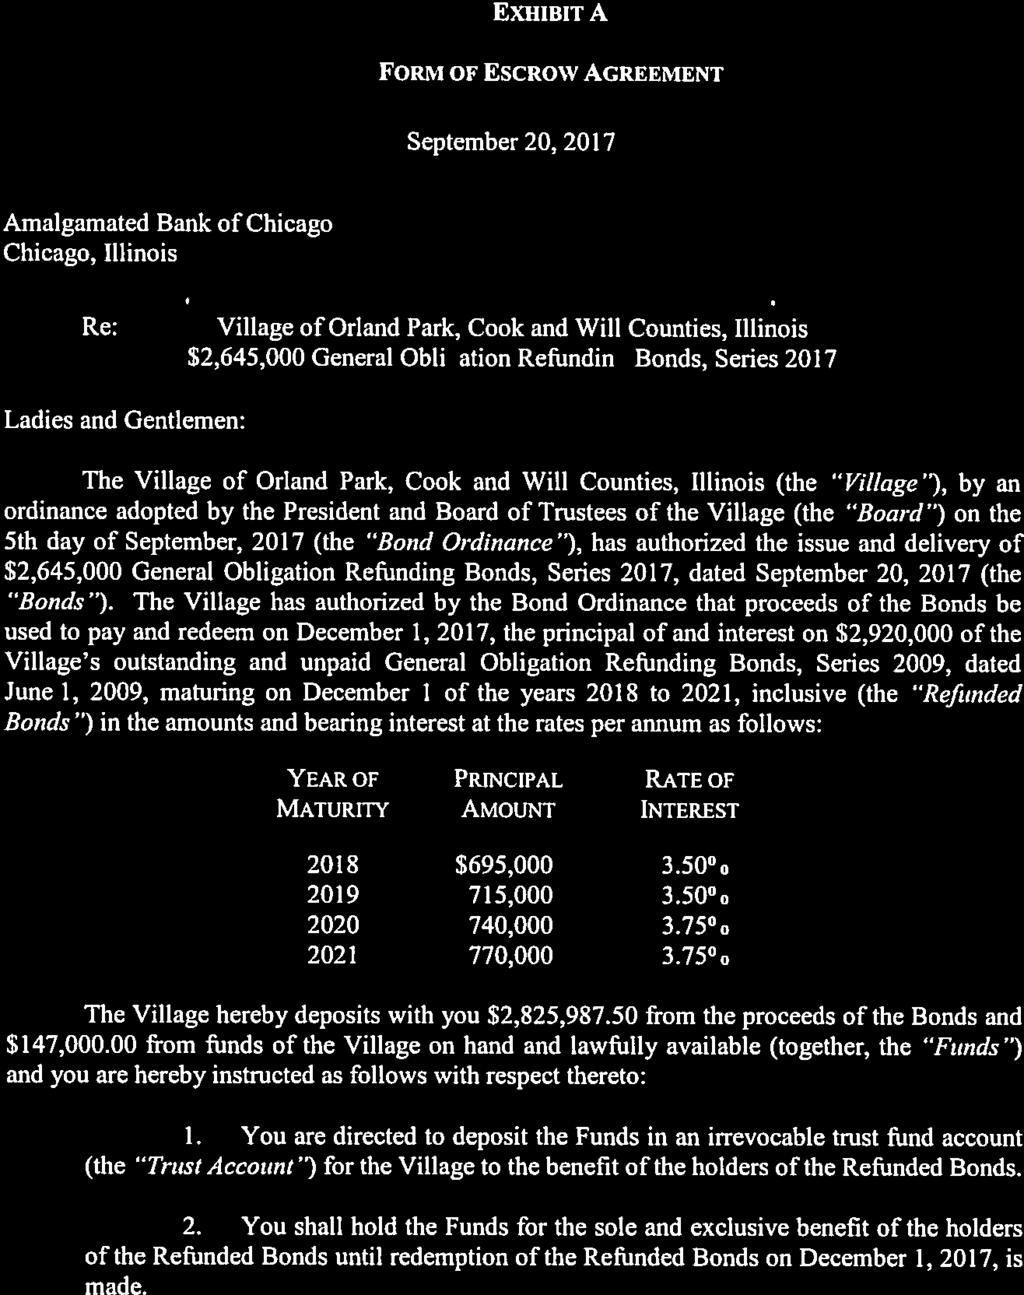 EXHIBIT A FORM OF ESCROW AGREEMENT September 20, 2017 Amalgamated Bank of Chicago Chicago, Illinois Re: Village of Orland Park, Cook and Will Counties, Illinois $2,645,000 General Obligation